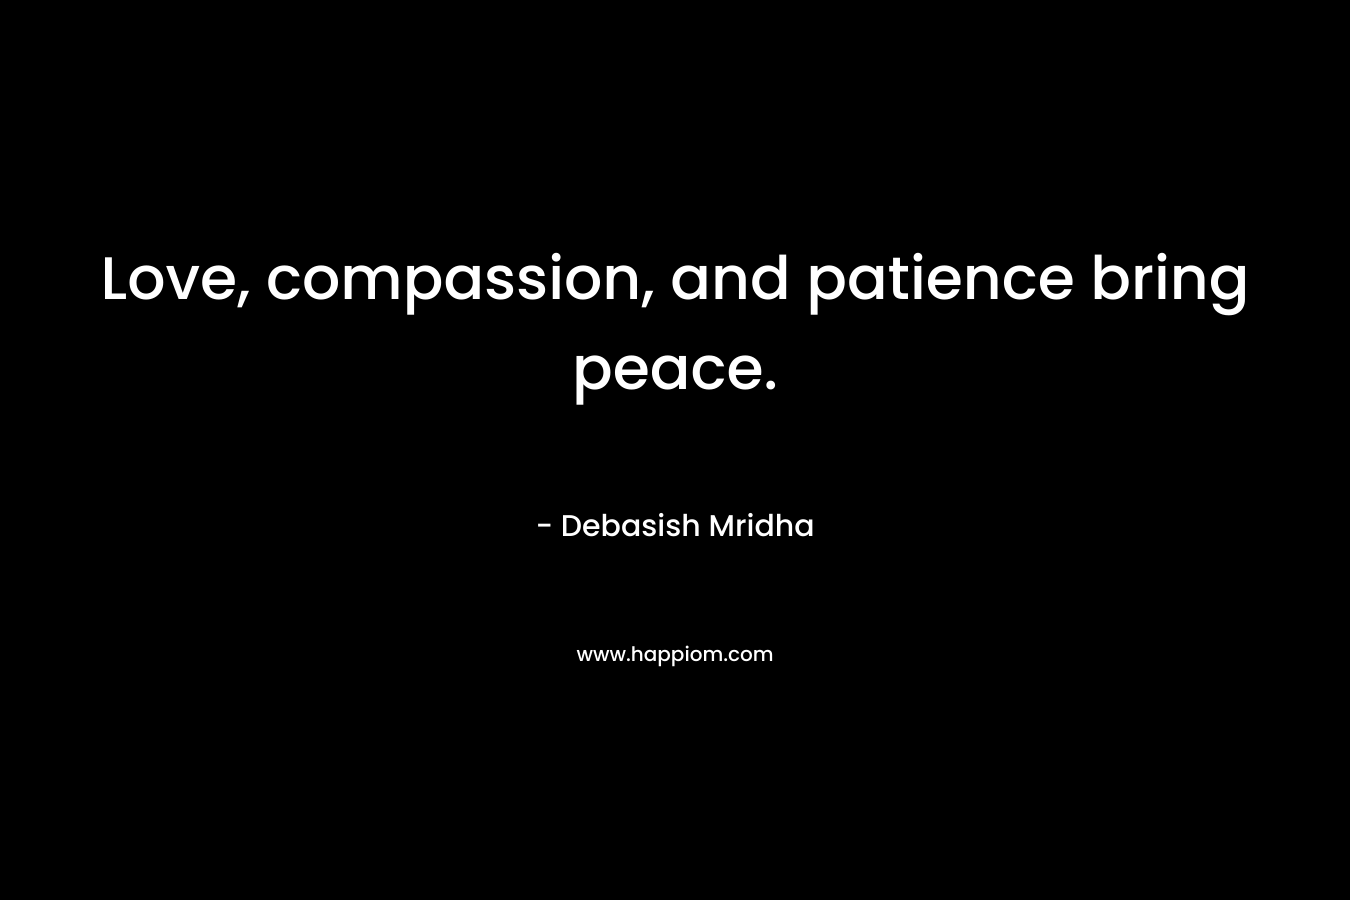 Love, compassion, and patience bring peace.